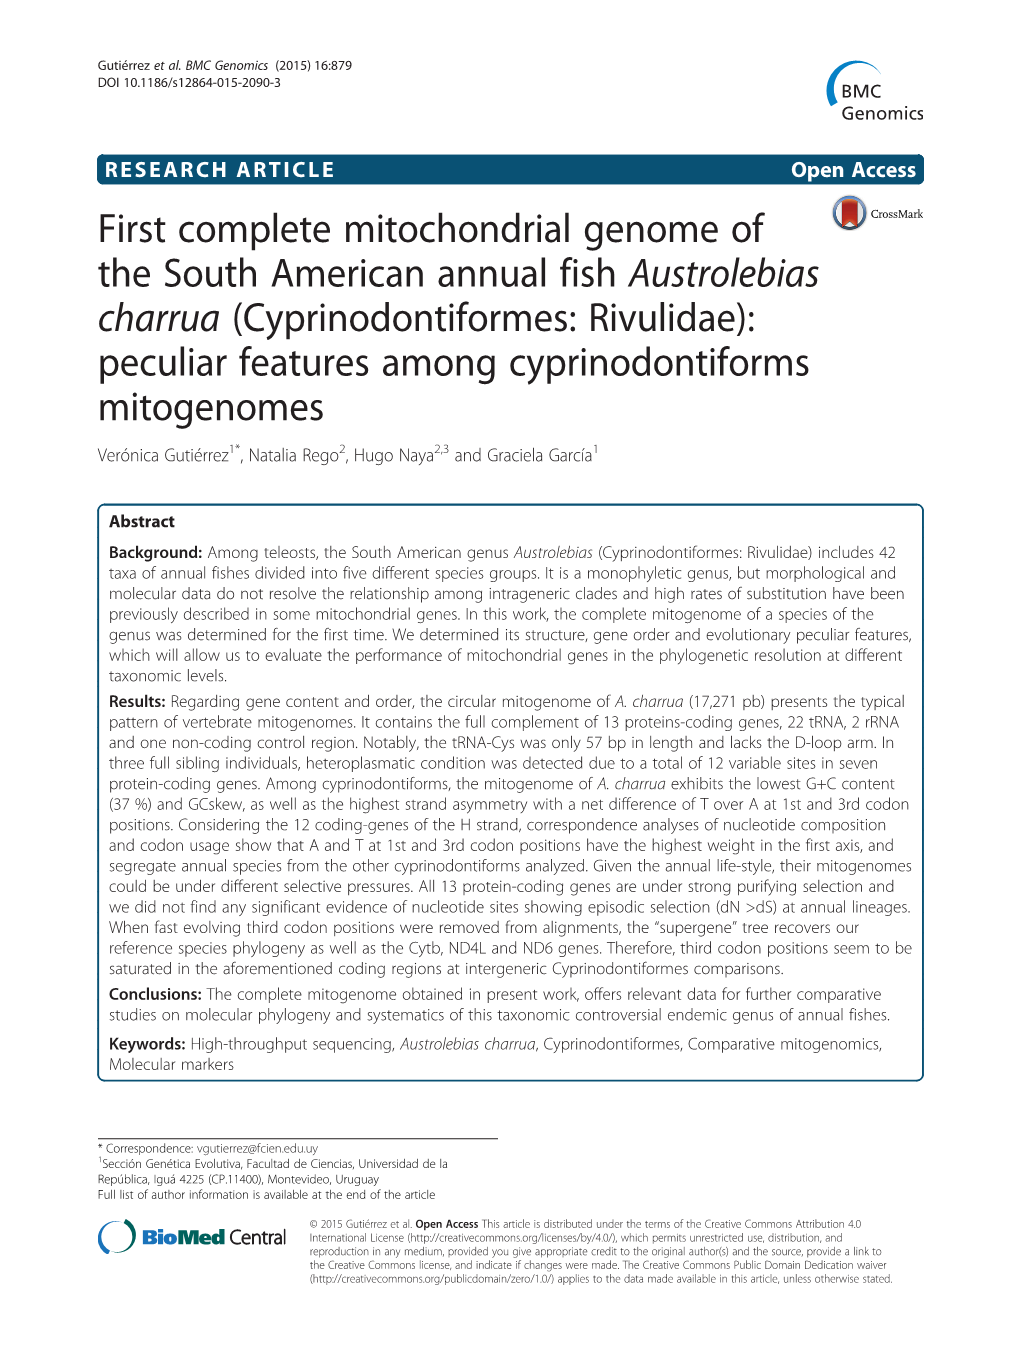 First Complete Mitochondrial Genome of the South American Annual Fish